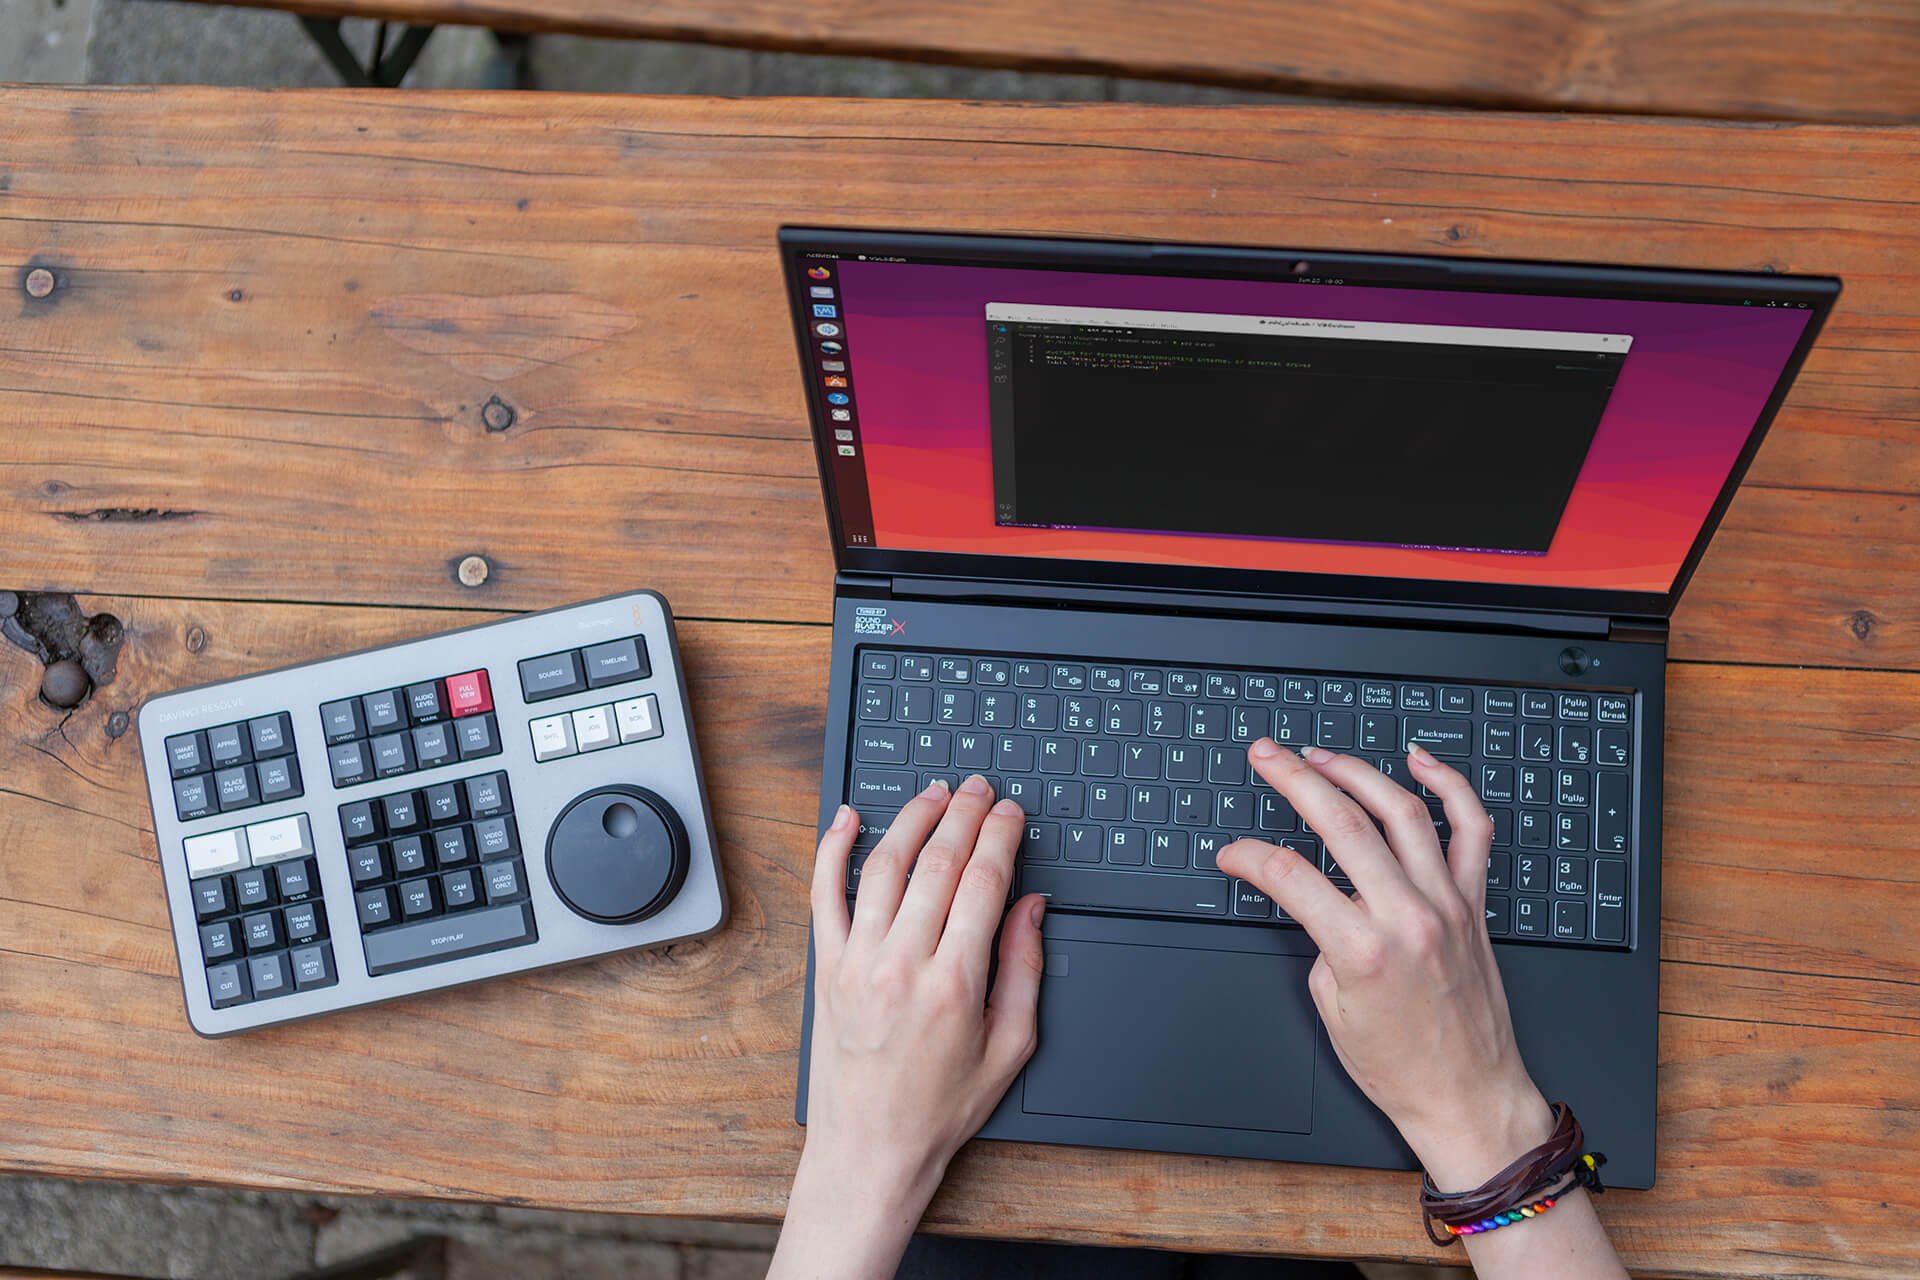 Clevo PD50 Laptop With Ubuntu Linux